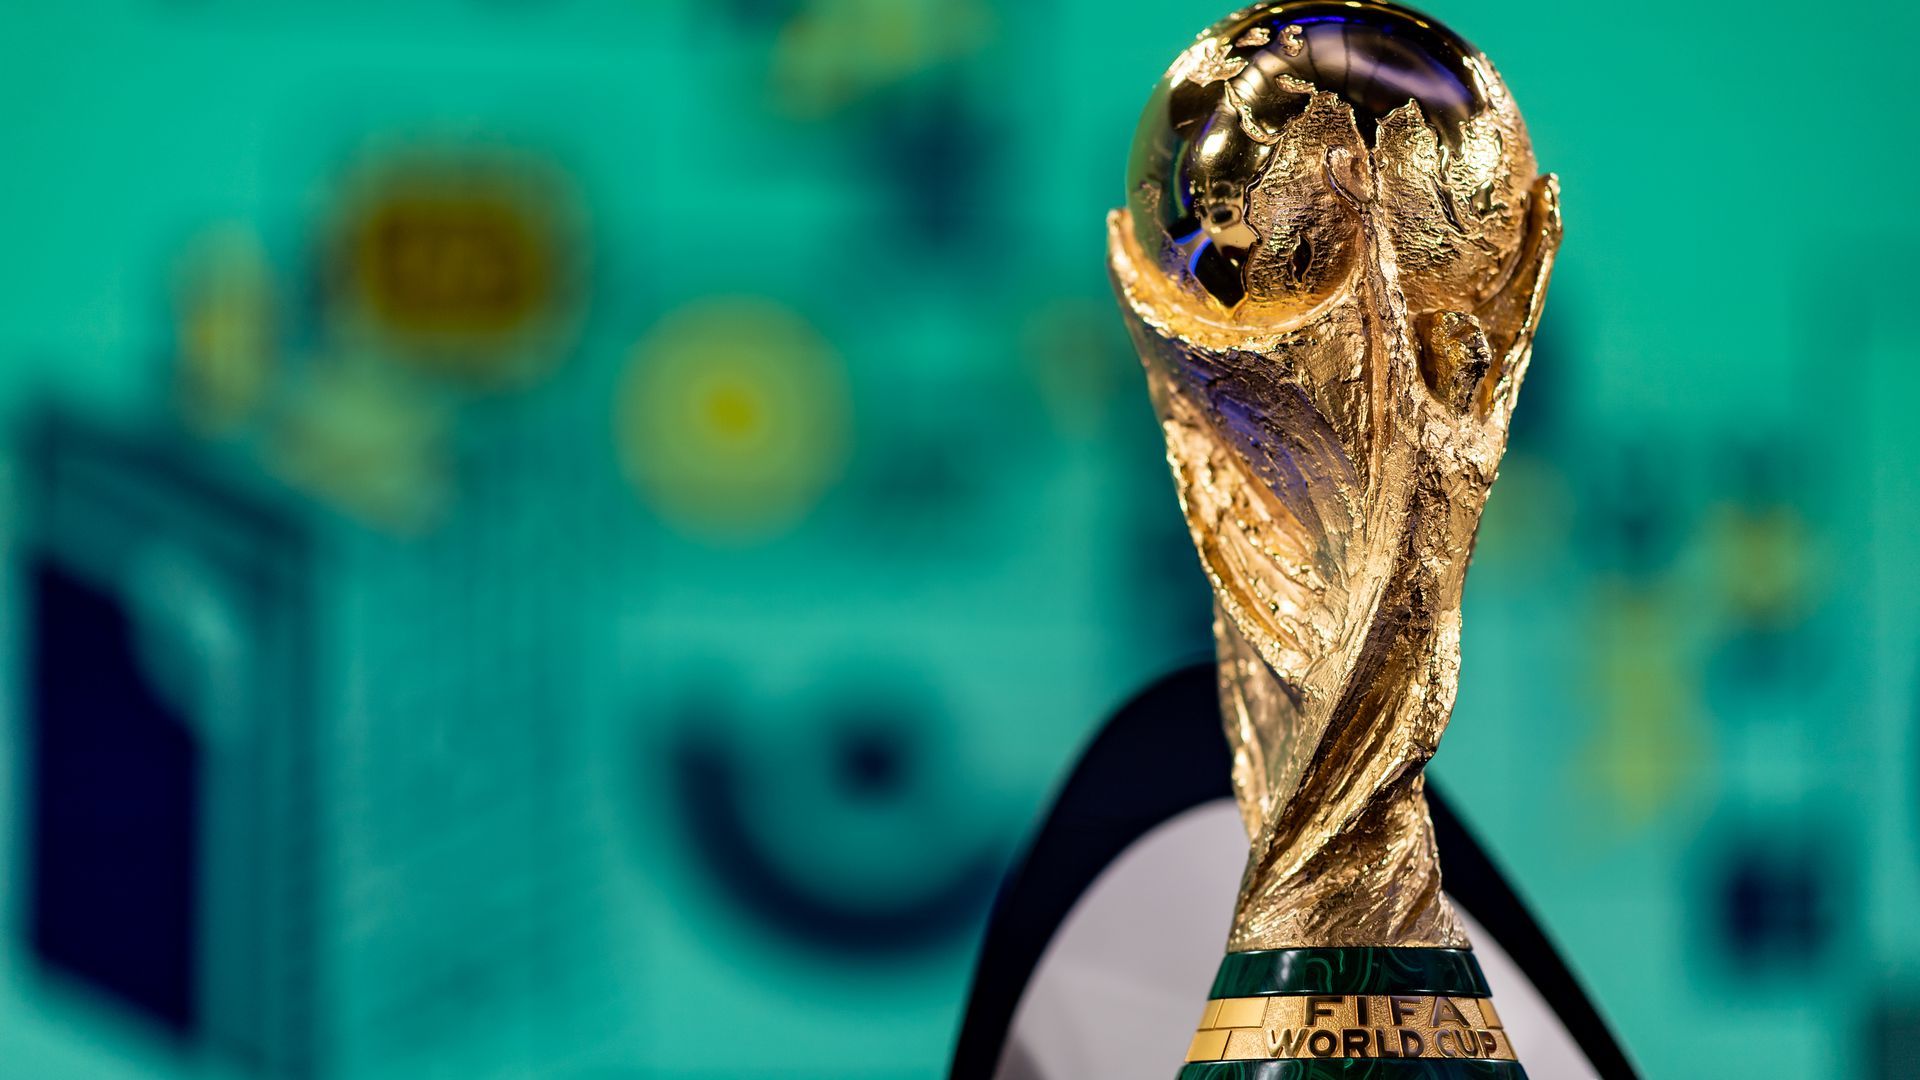 The gold FIFA World Cup trophy with green background behind it. 